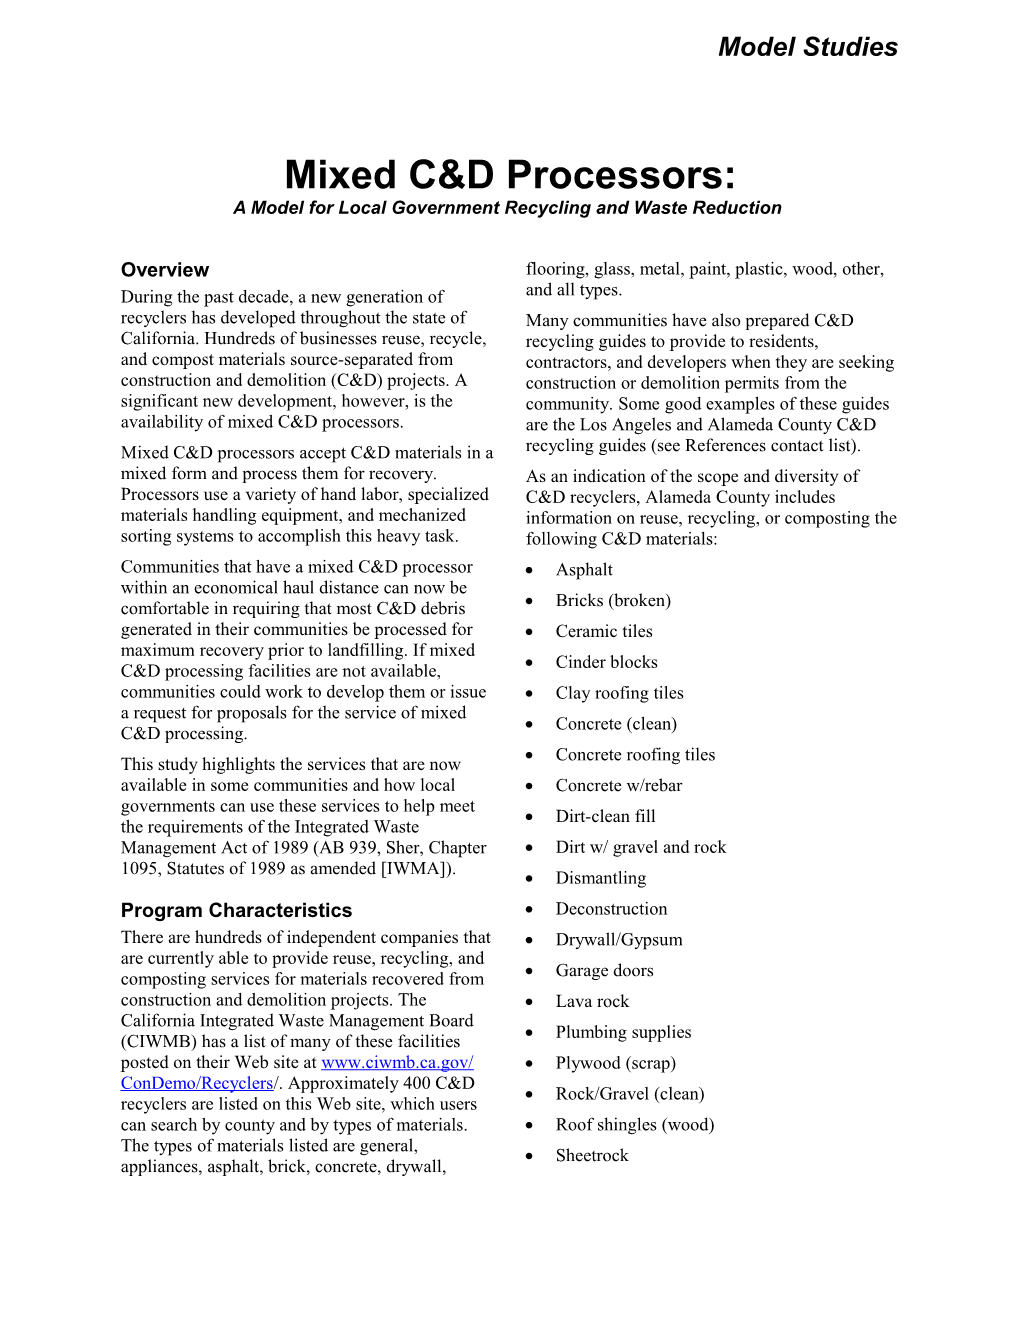 Mixed C&D Processors: A Model For Local Government Recycling And Waste Reduction